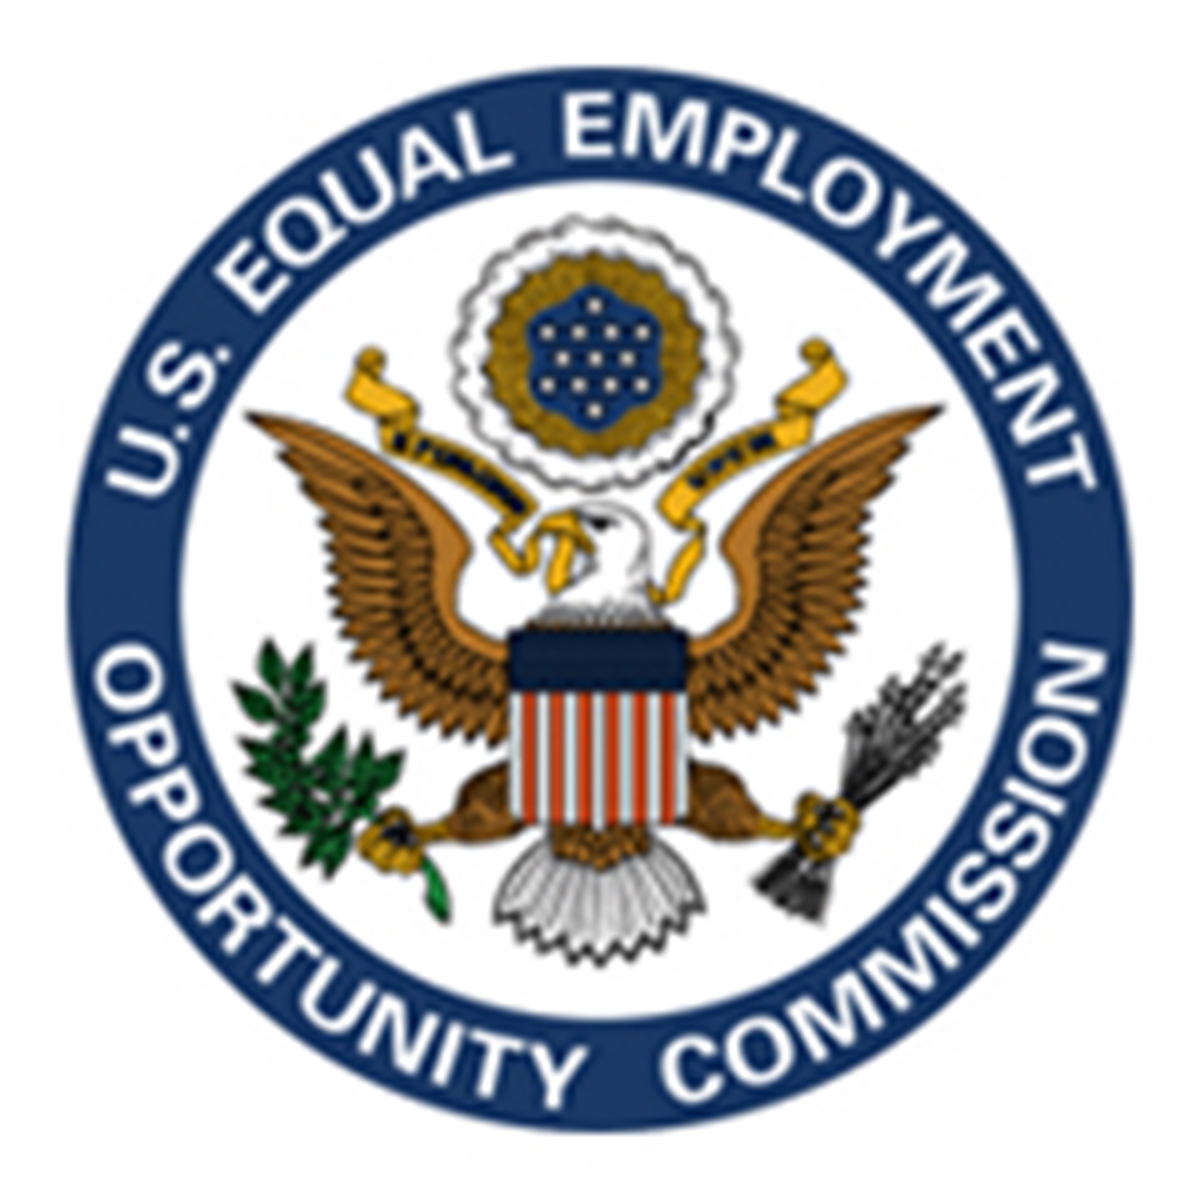 J&M Industries Sued by EEOC for Age Discrimination | U.S. Equal Employment Opportunity Commission (EEOC) - JDSupra